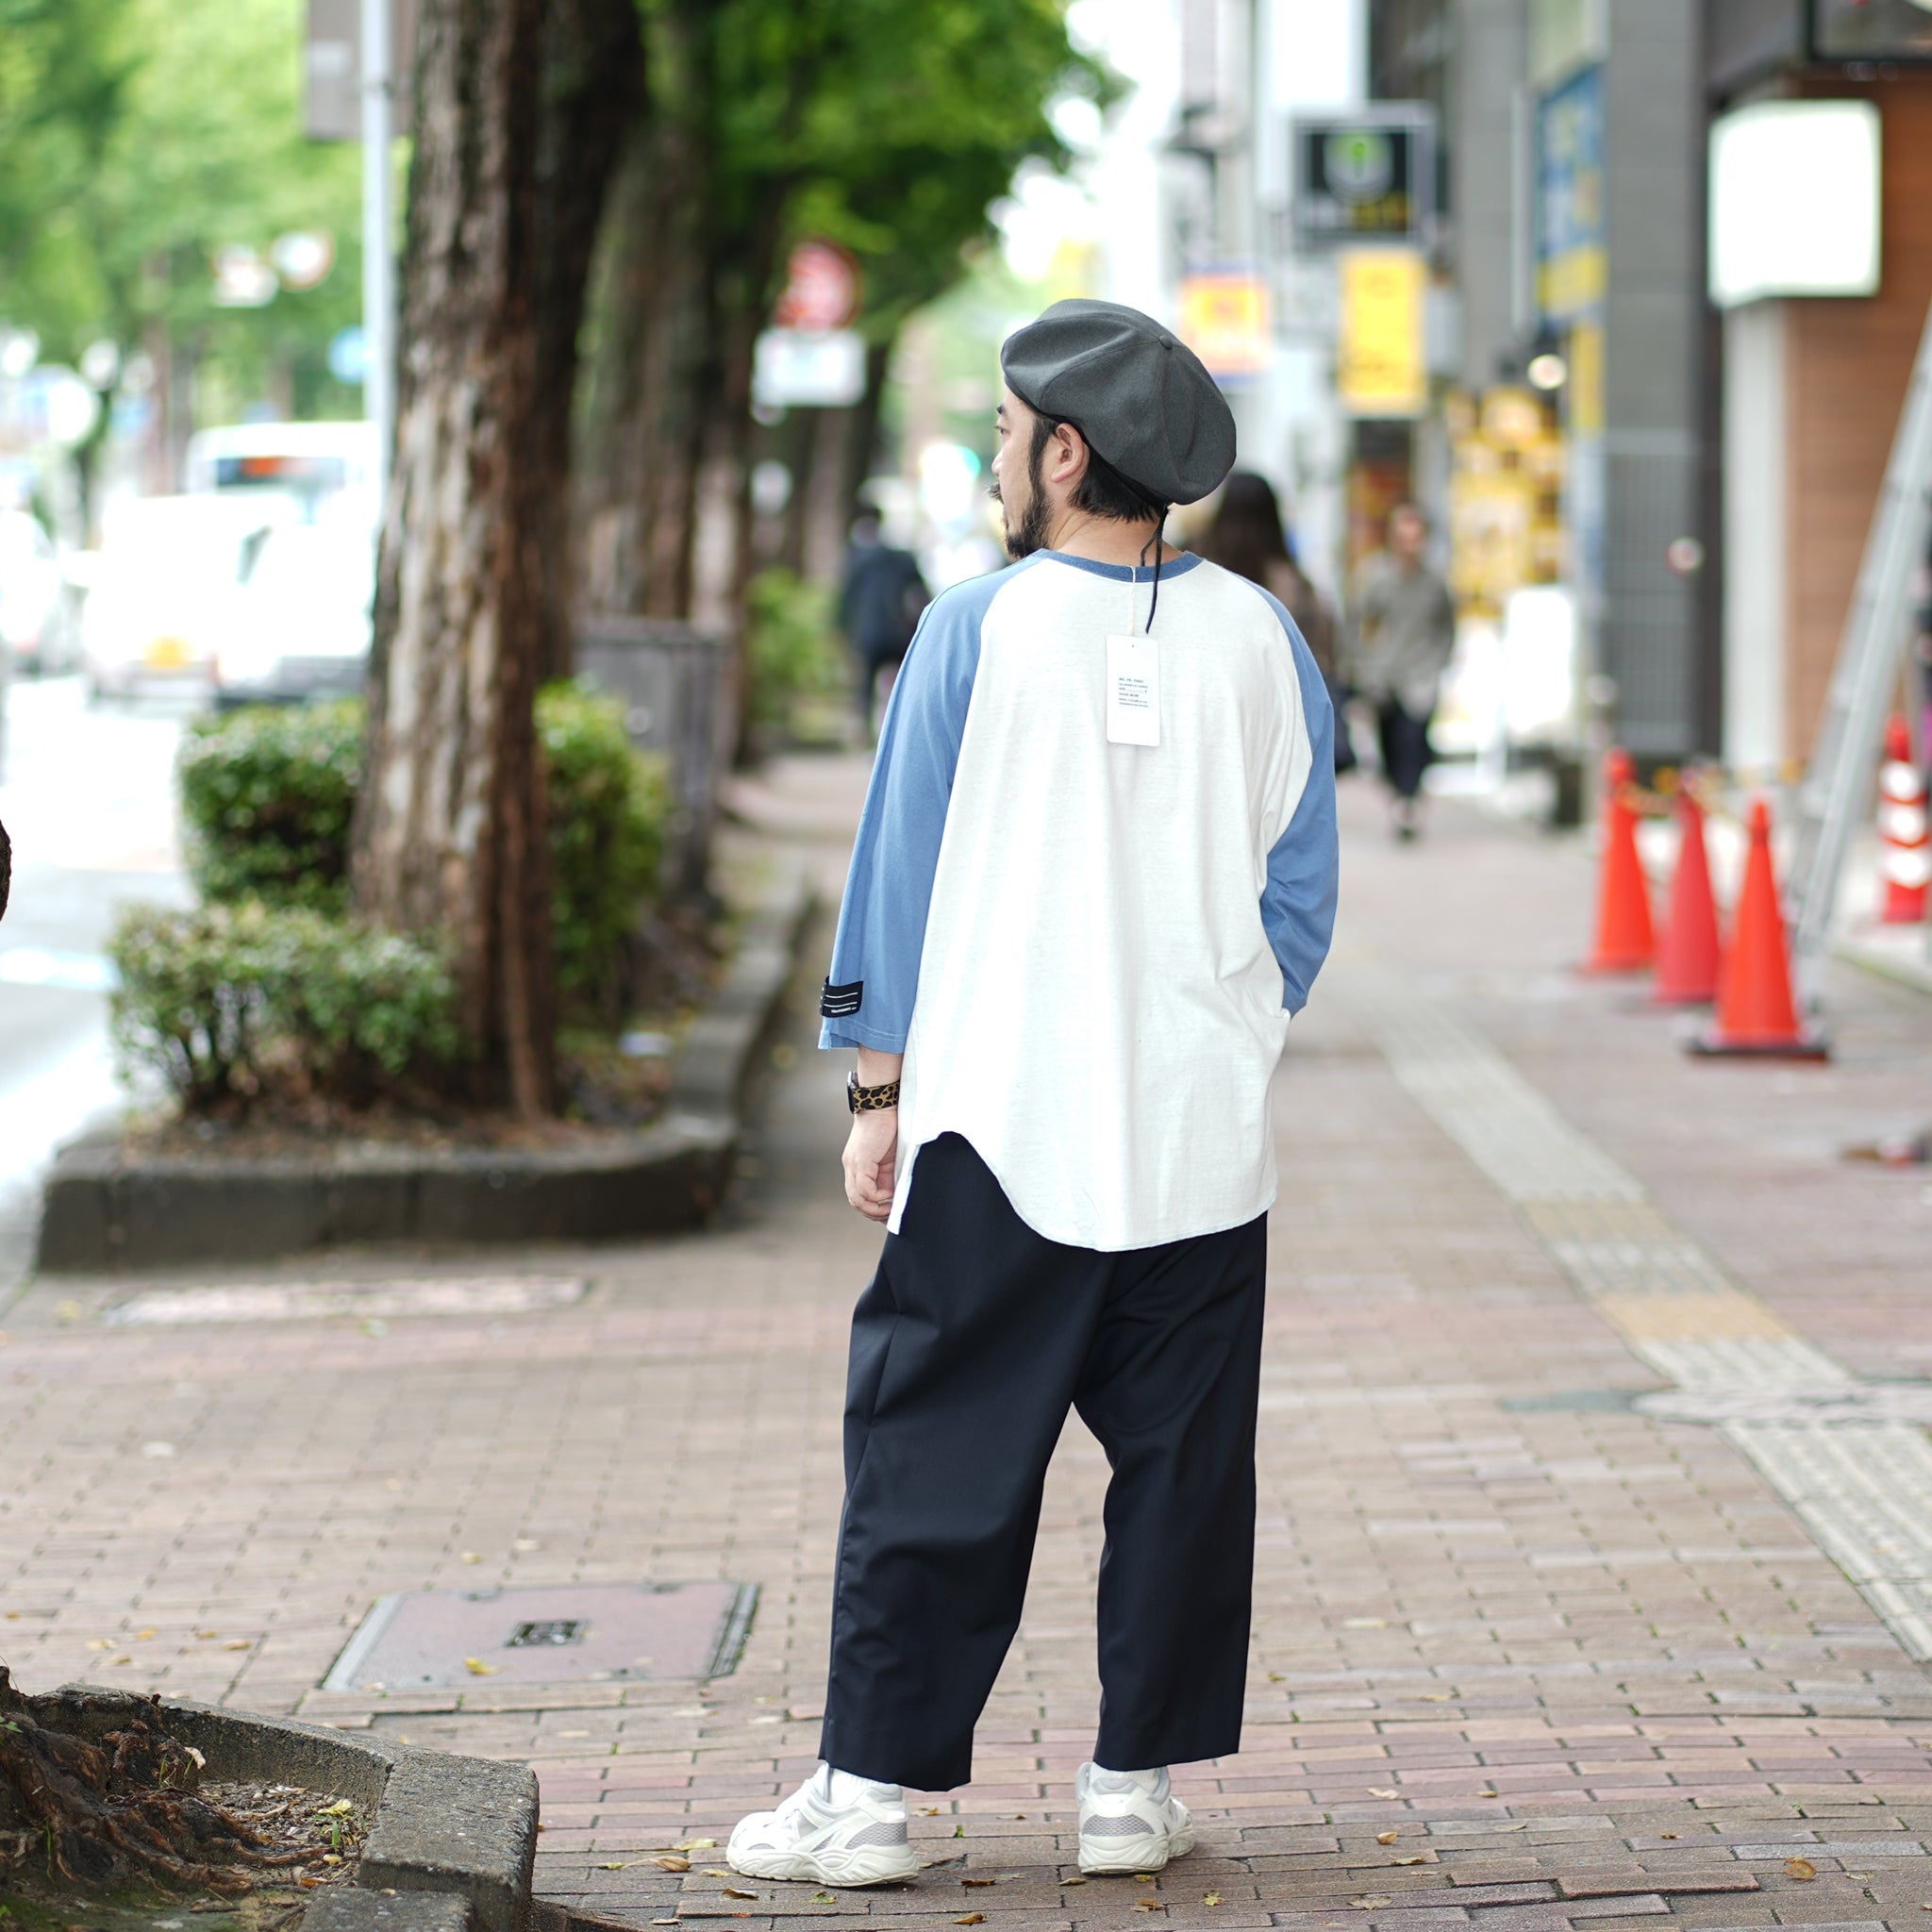 No:tb-t0201_Blue | Name:ALL ROUND TRAINER 3/4 T-shirts | Color:Blue【TRAINERBOYS_トレーナーボーイズ】